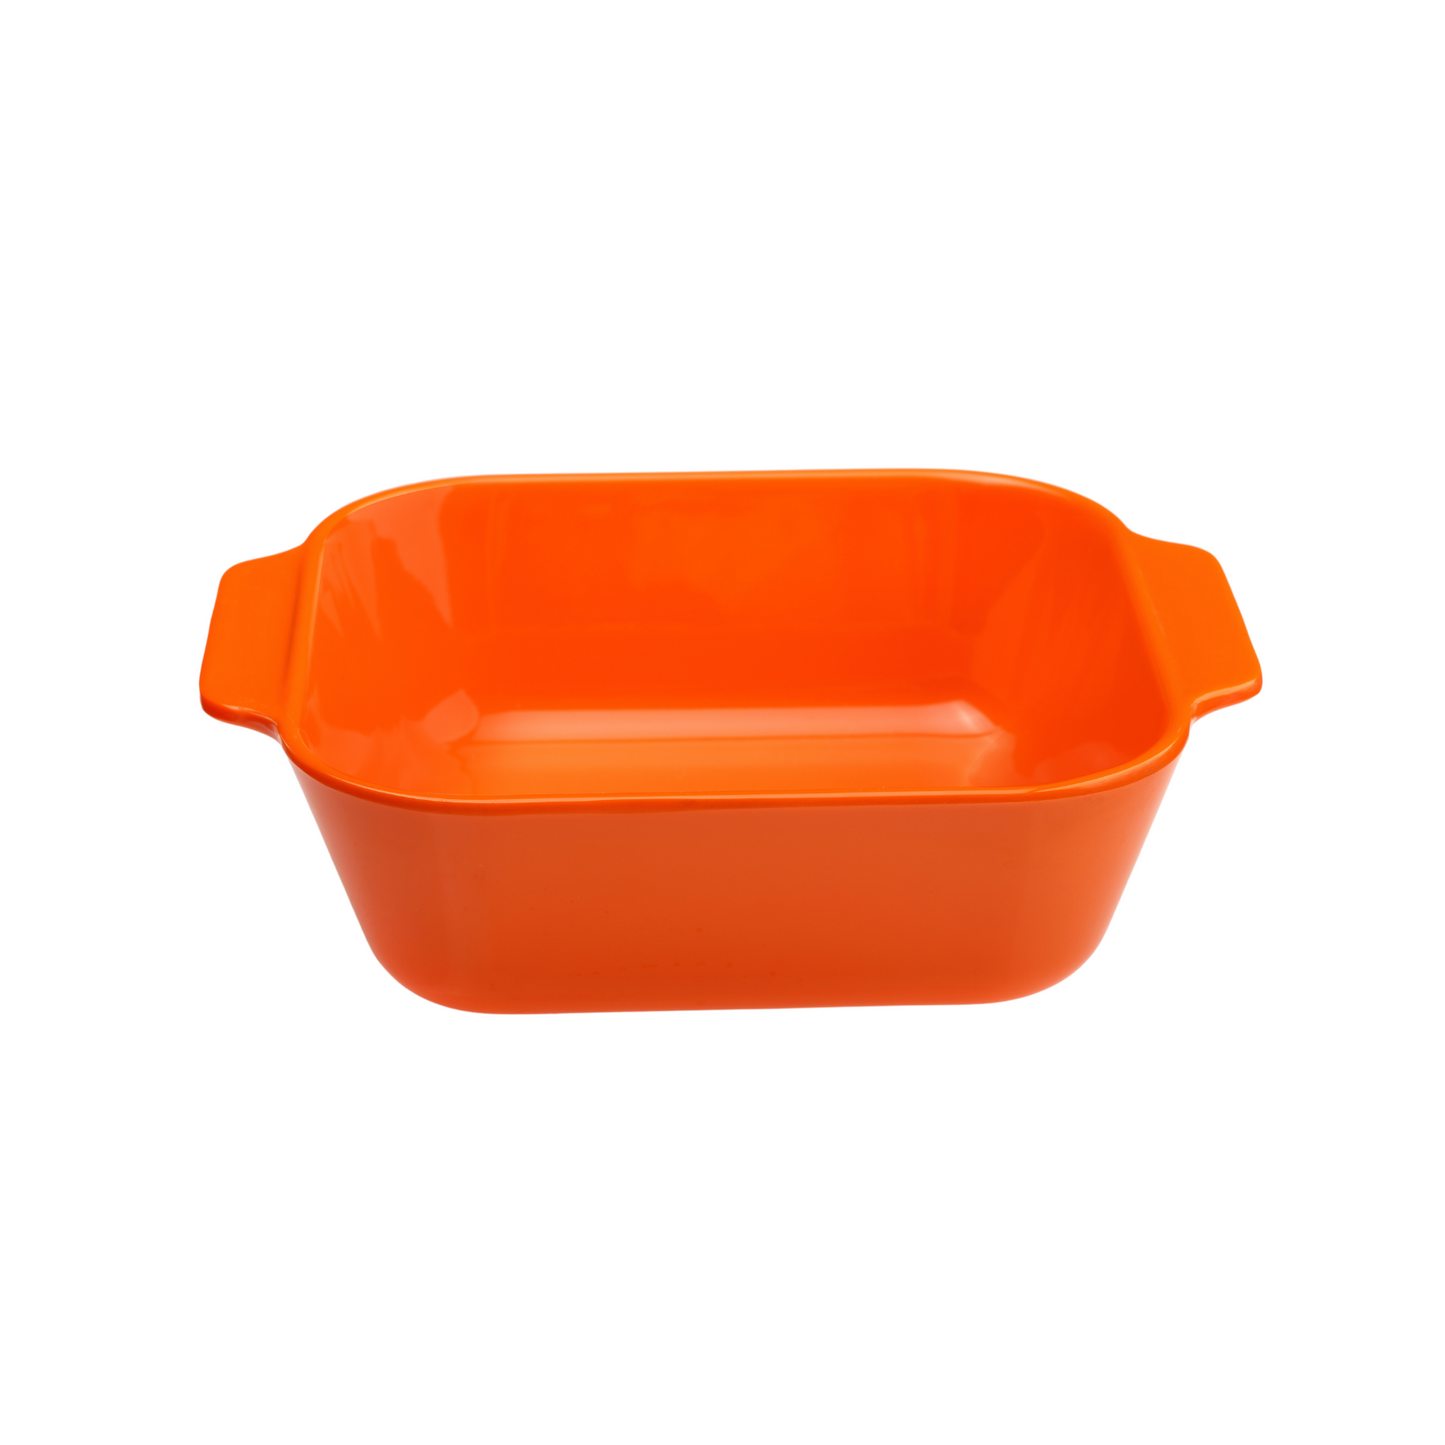 The Plate Story - Snack Bowl with Handle 7” for Toddler - Orange